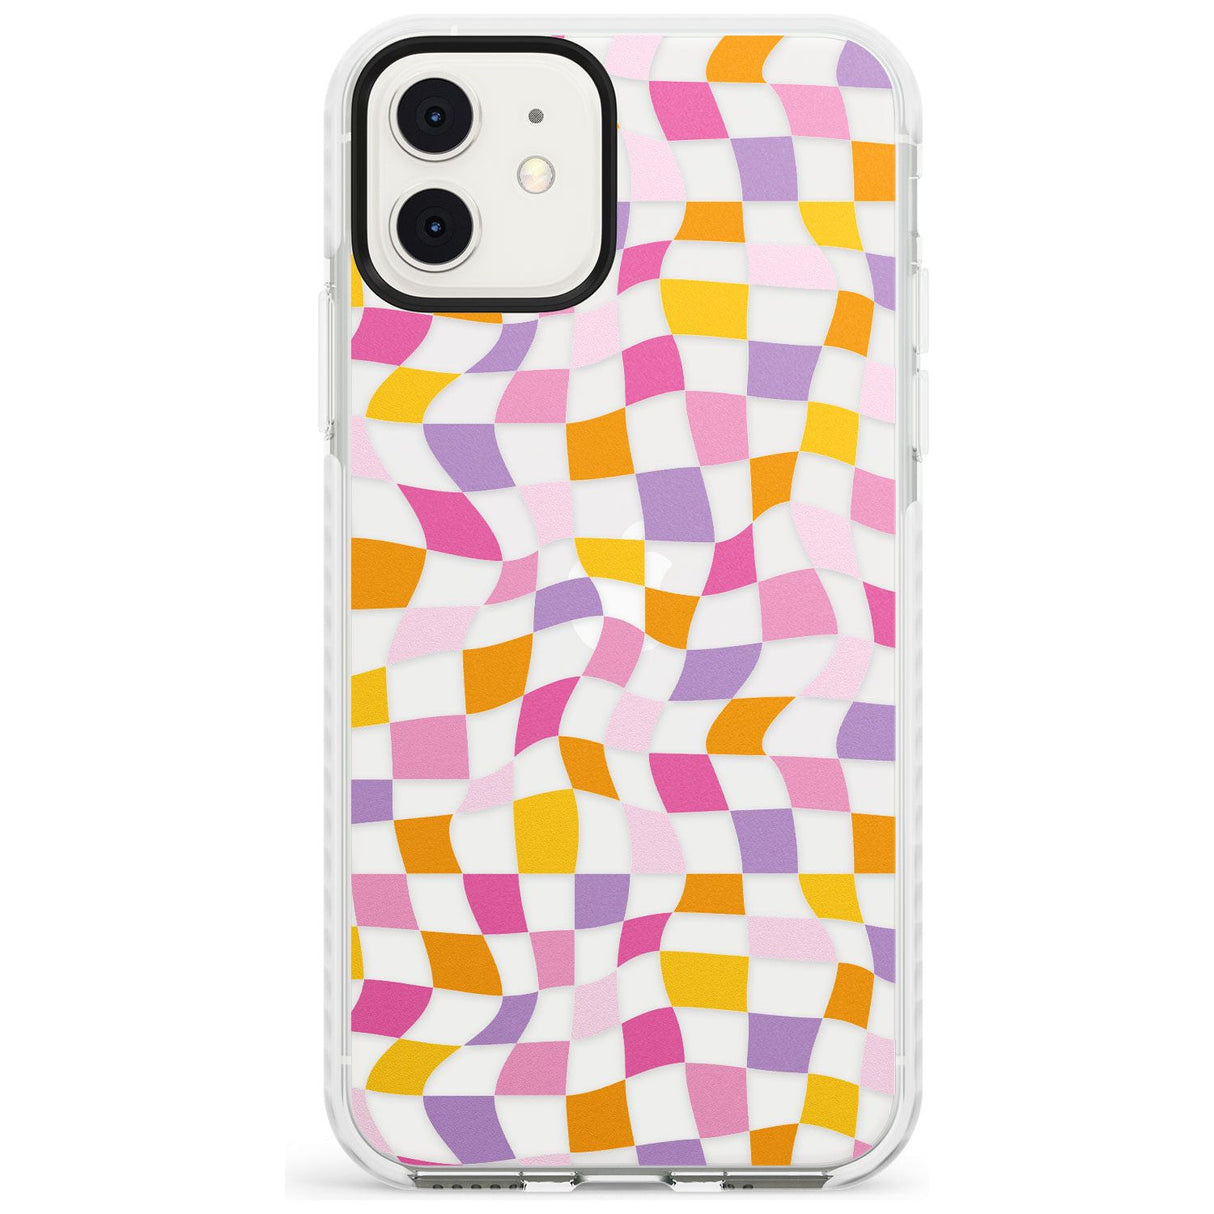 Wonky Squares Pattern Impact Phone Case for iPhone 11